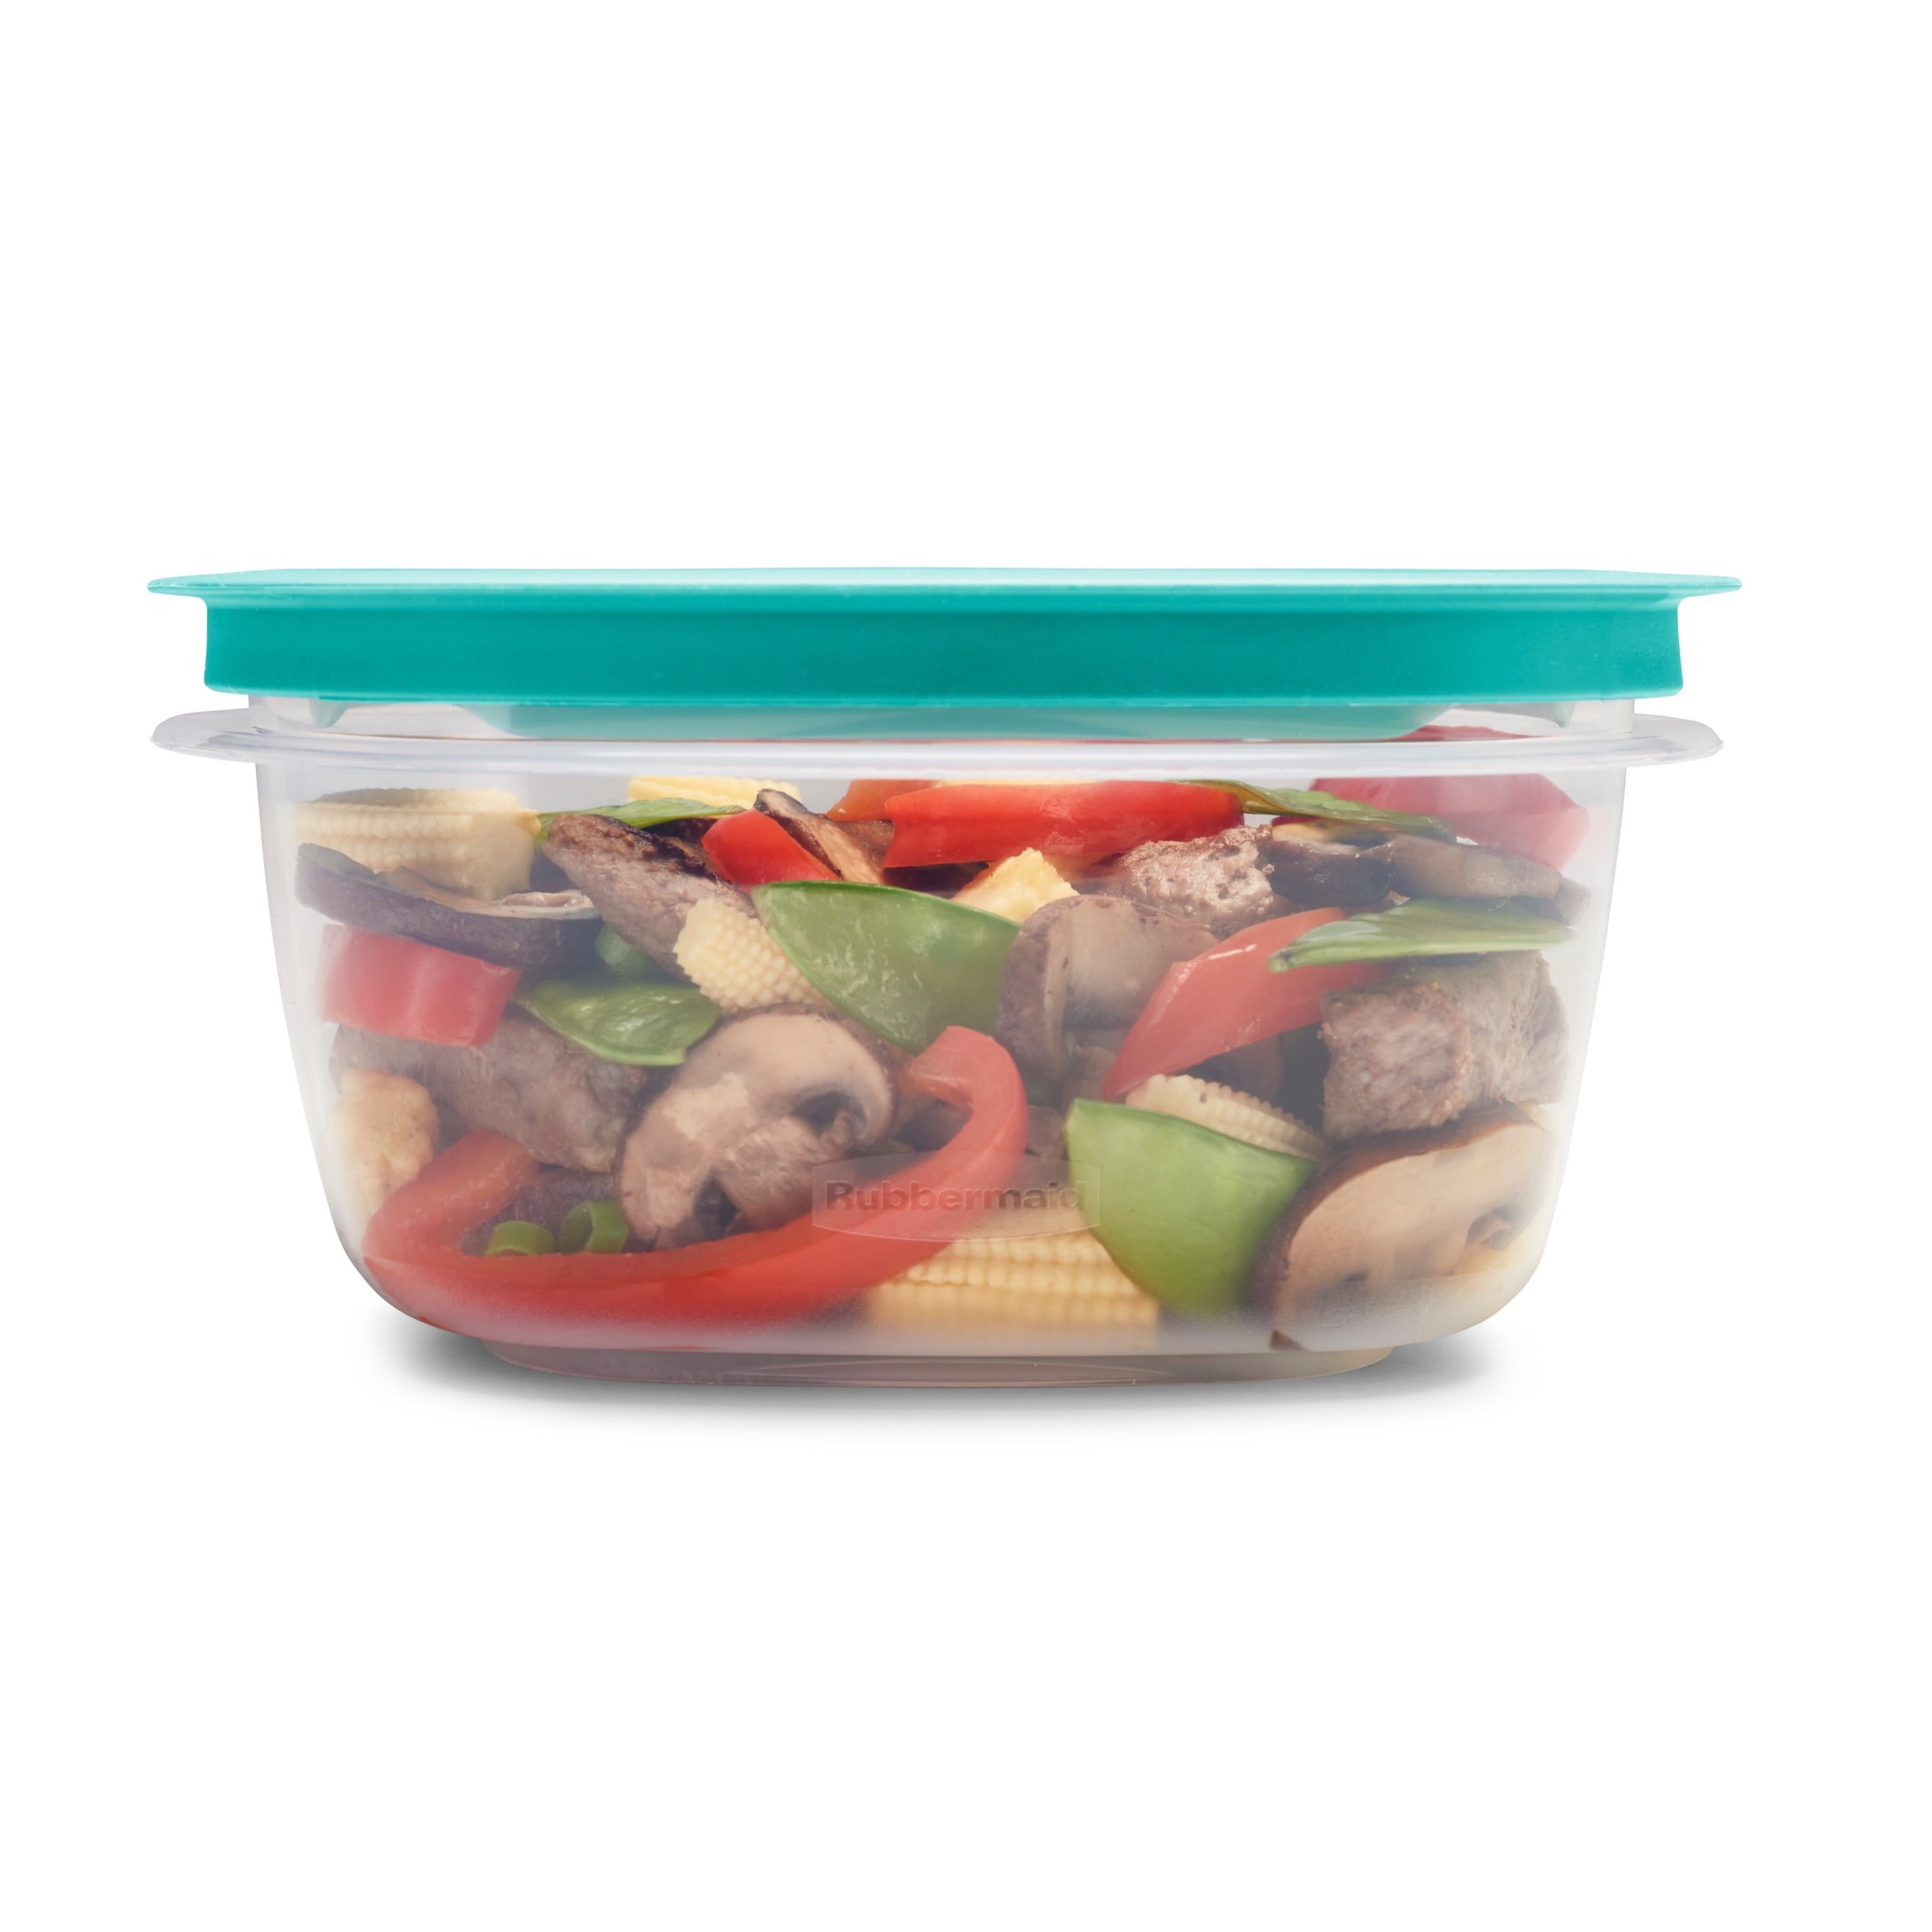 Rubbermaid Flex & Seal Food Containers withEasy Find Lids 6 ct